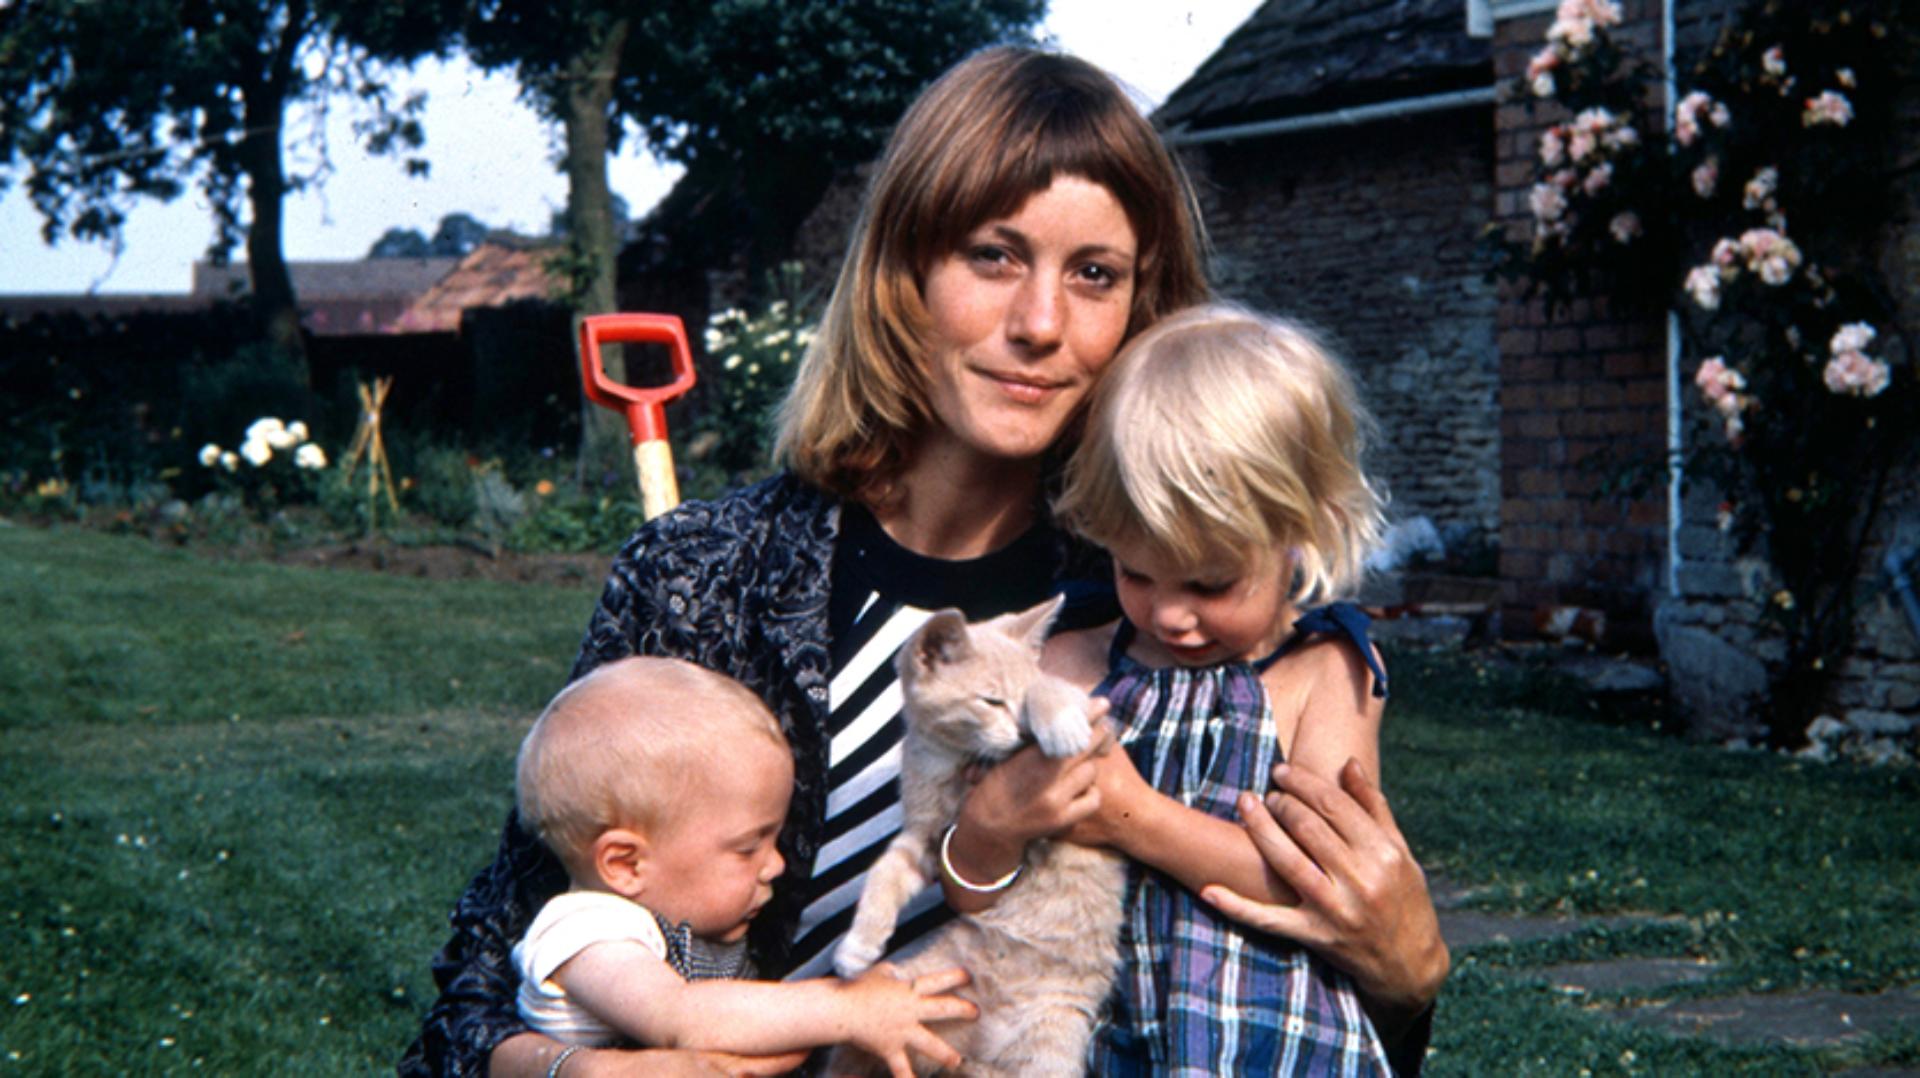 Deirdre Dyson holding toddler Emily, a young baby Jake, and a pet cat